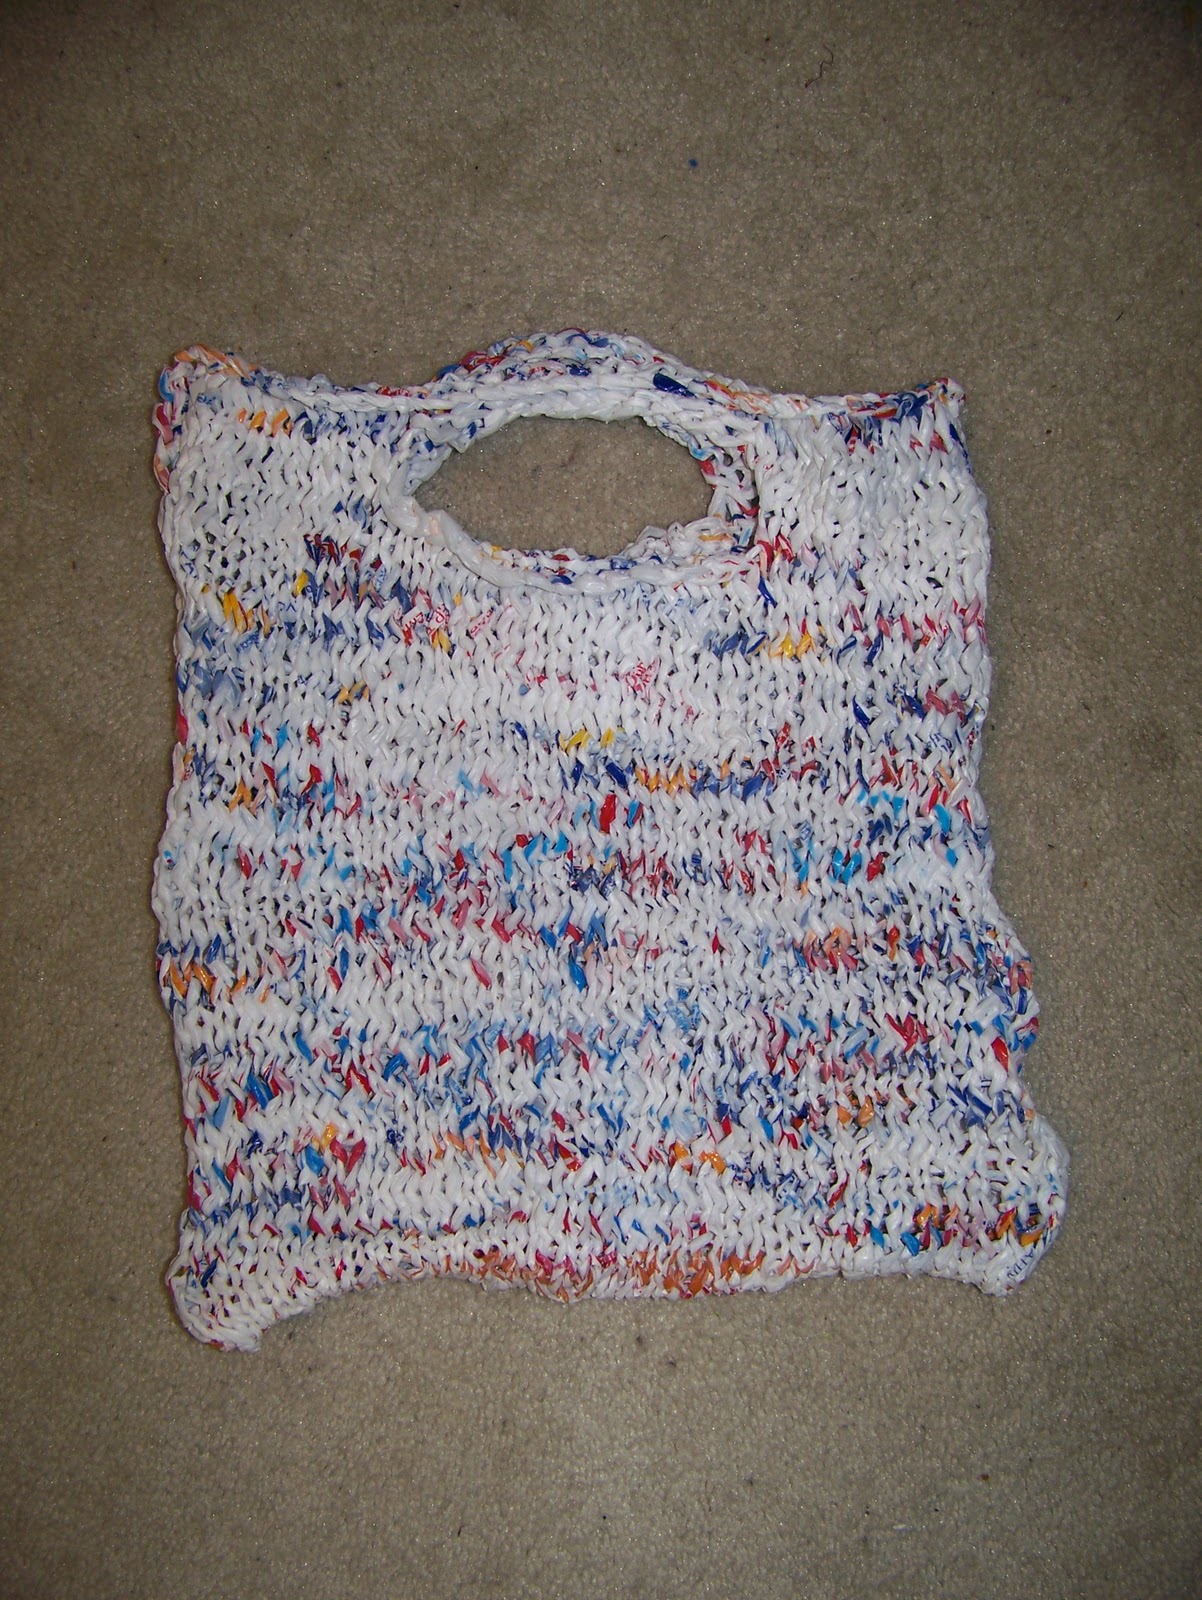 Making Cooley Stuff: Recycled plastic grocery bag tote